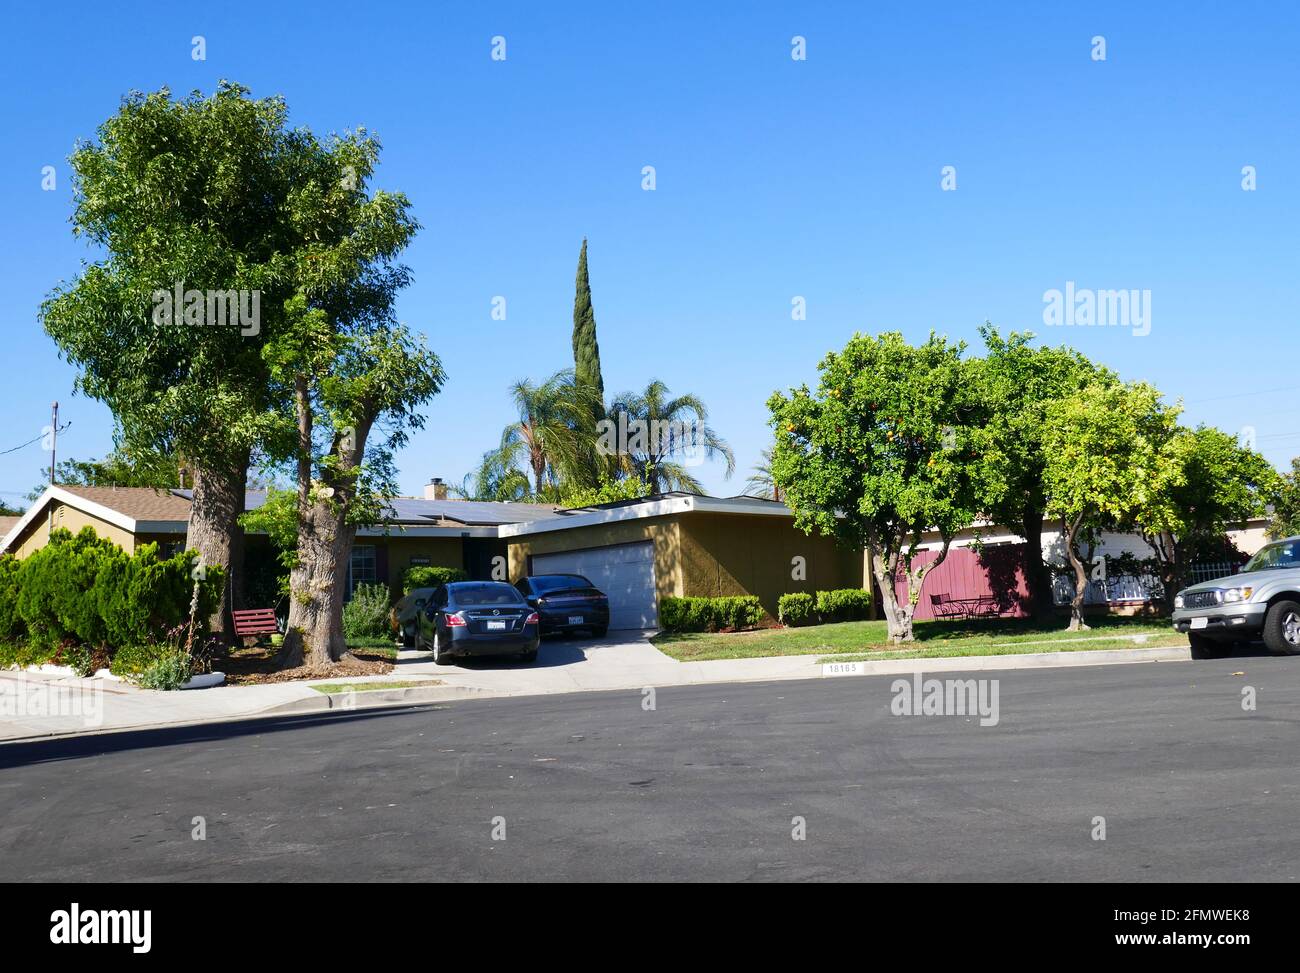 Northridge, California, USA 3rd May 2021 A general view of atmosphere of singer Donna Summer's former home/house at 18165 Eccles Street on May 3, 2021 in Northridge, California, USA. Photo by Barry King/Alamy Stock Photo Stock Photo